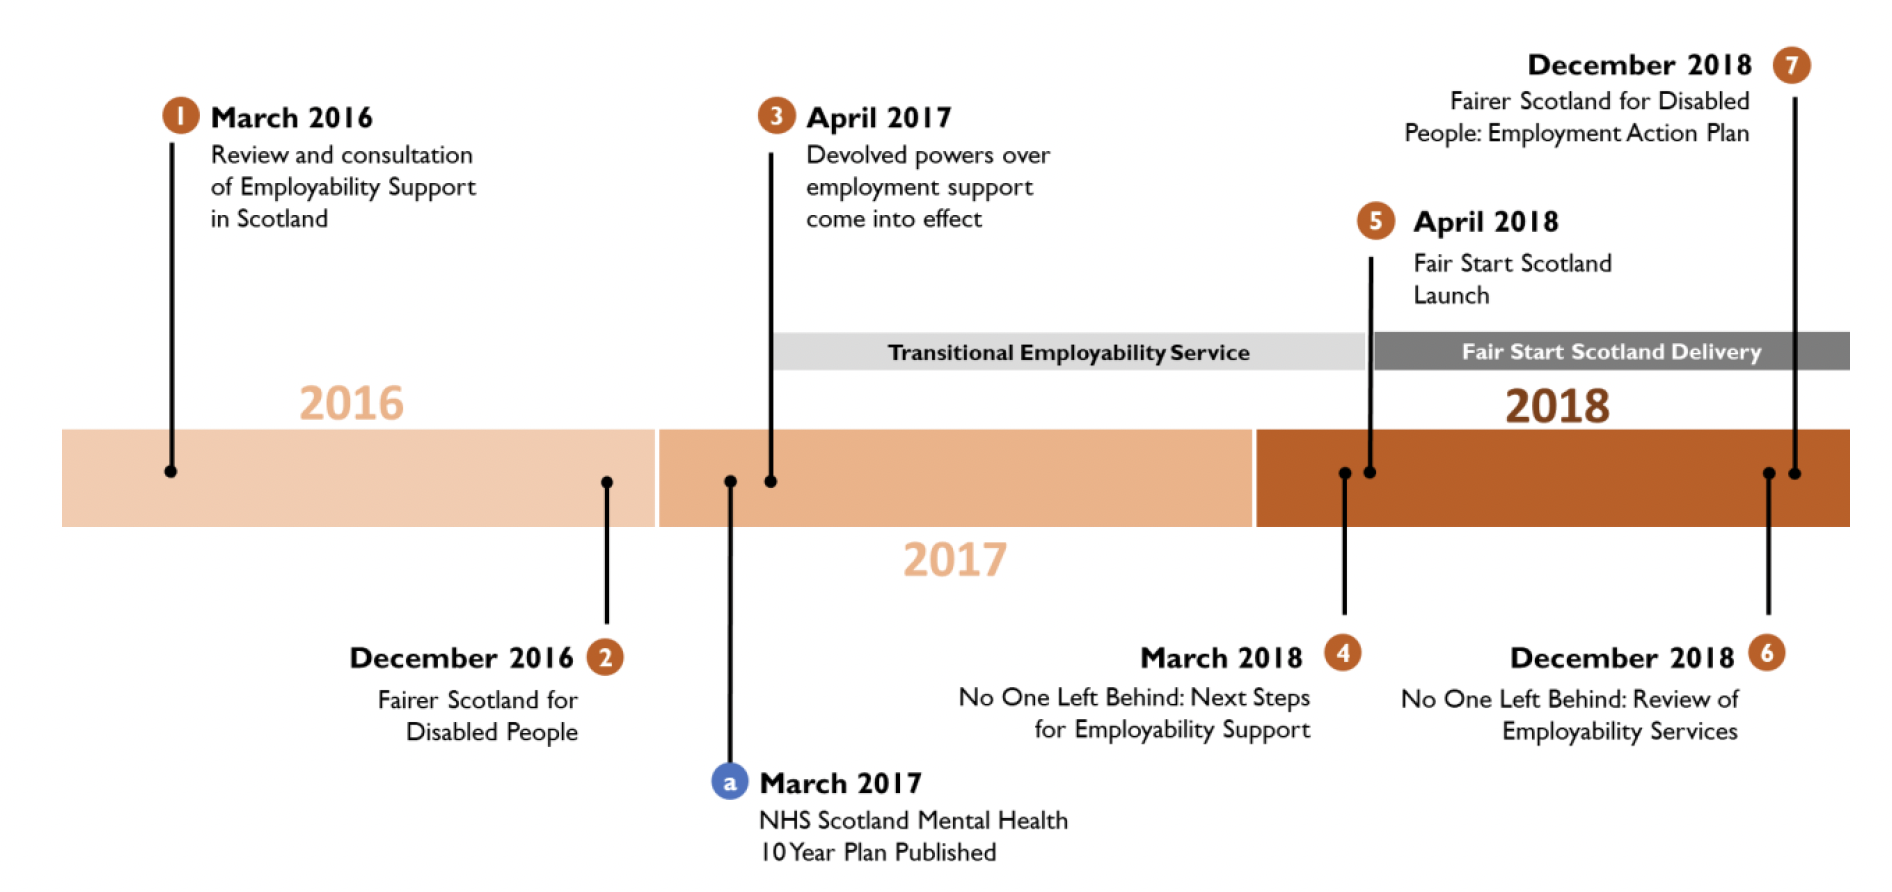 Timeline of Employability Policy in Scotland
showing the progress of policy from March 2016 to December 2018.